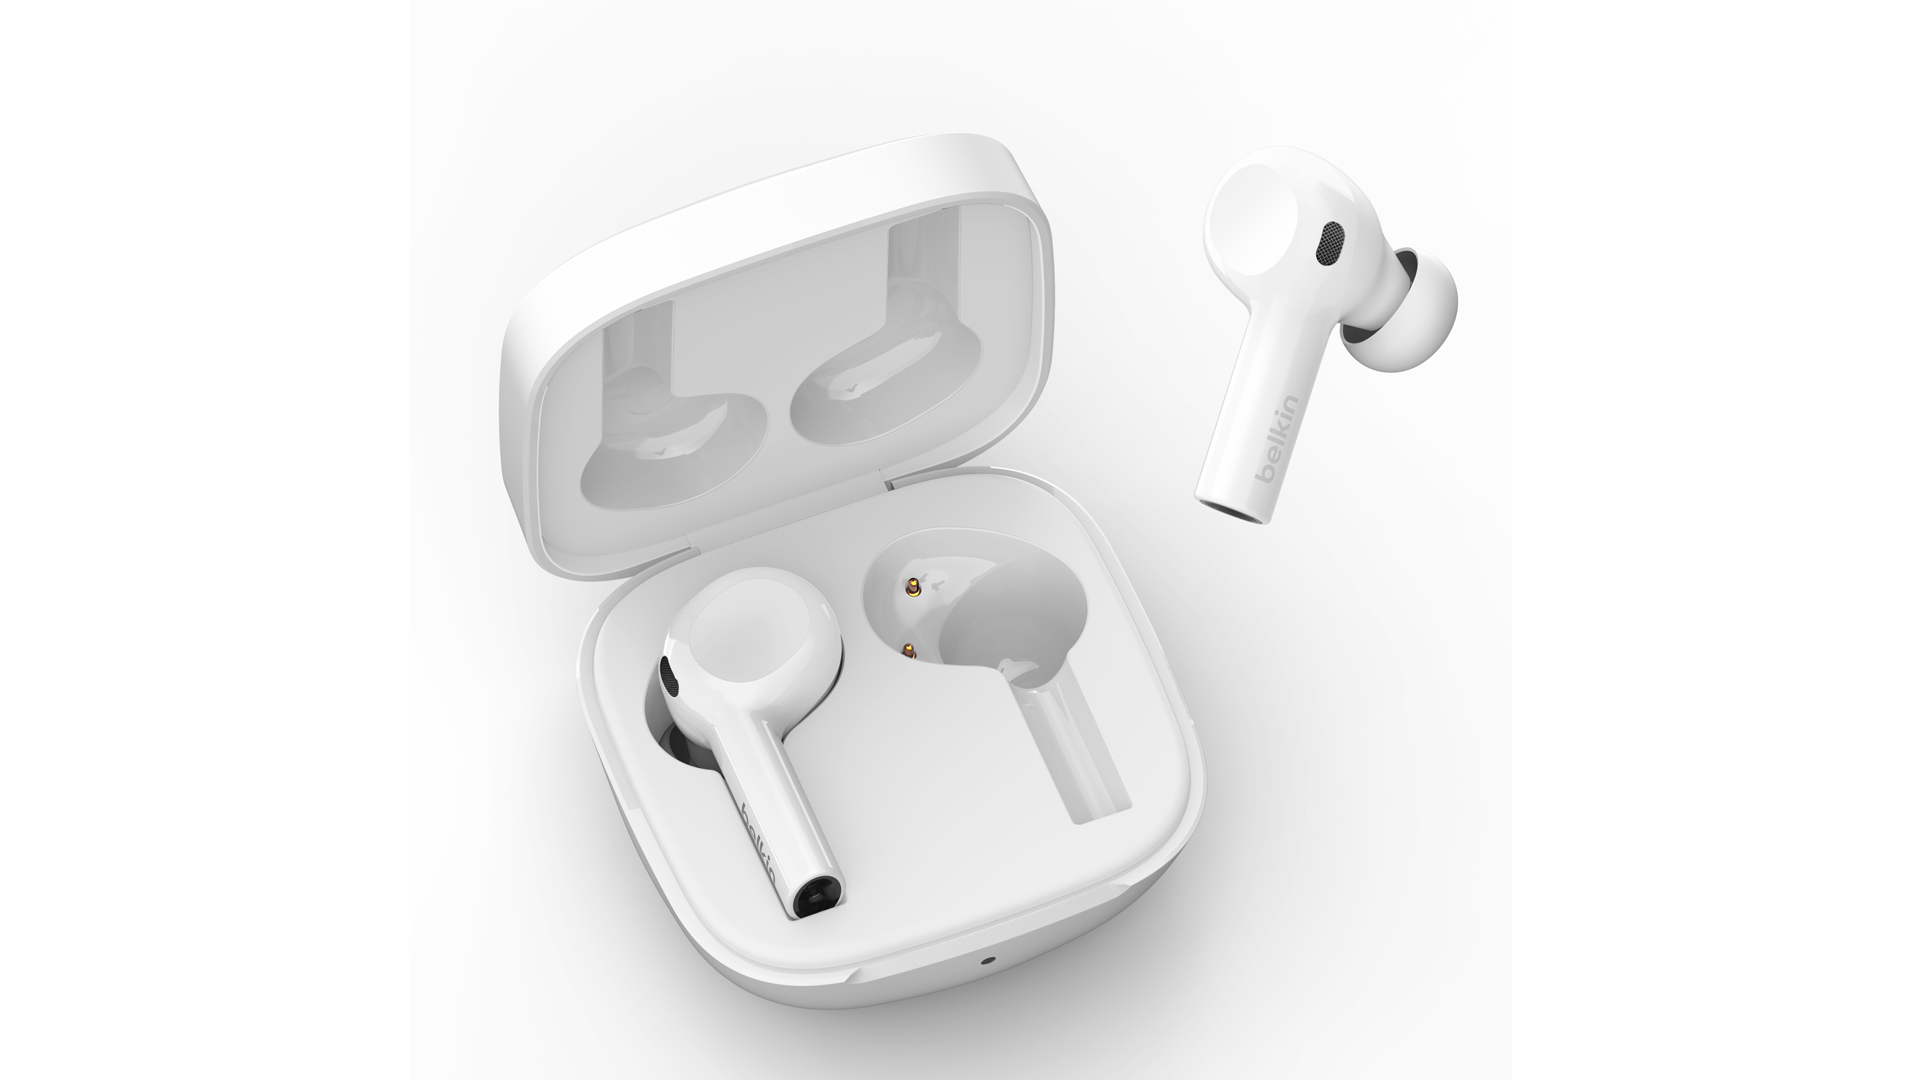 Belkin Unveils Wi-fi Earbuds with Apple’s ‘Discover My’ Technology